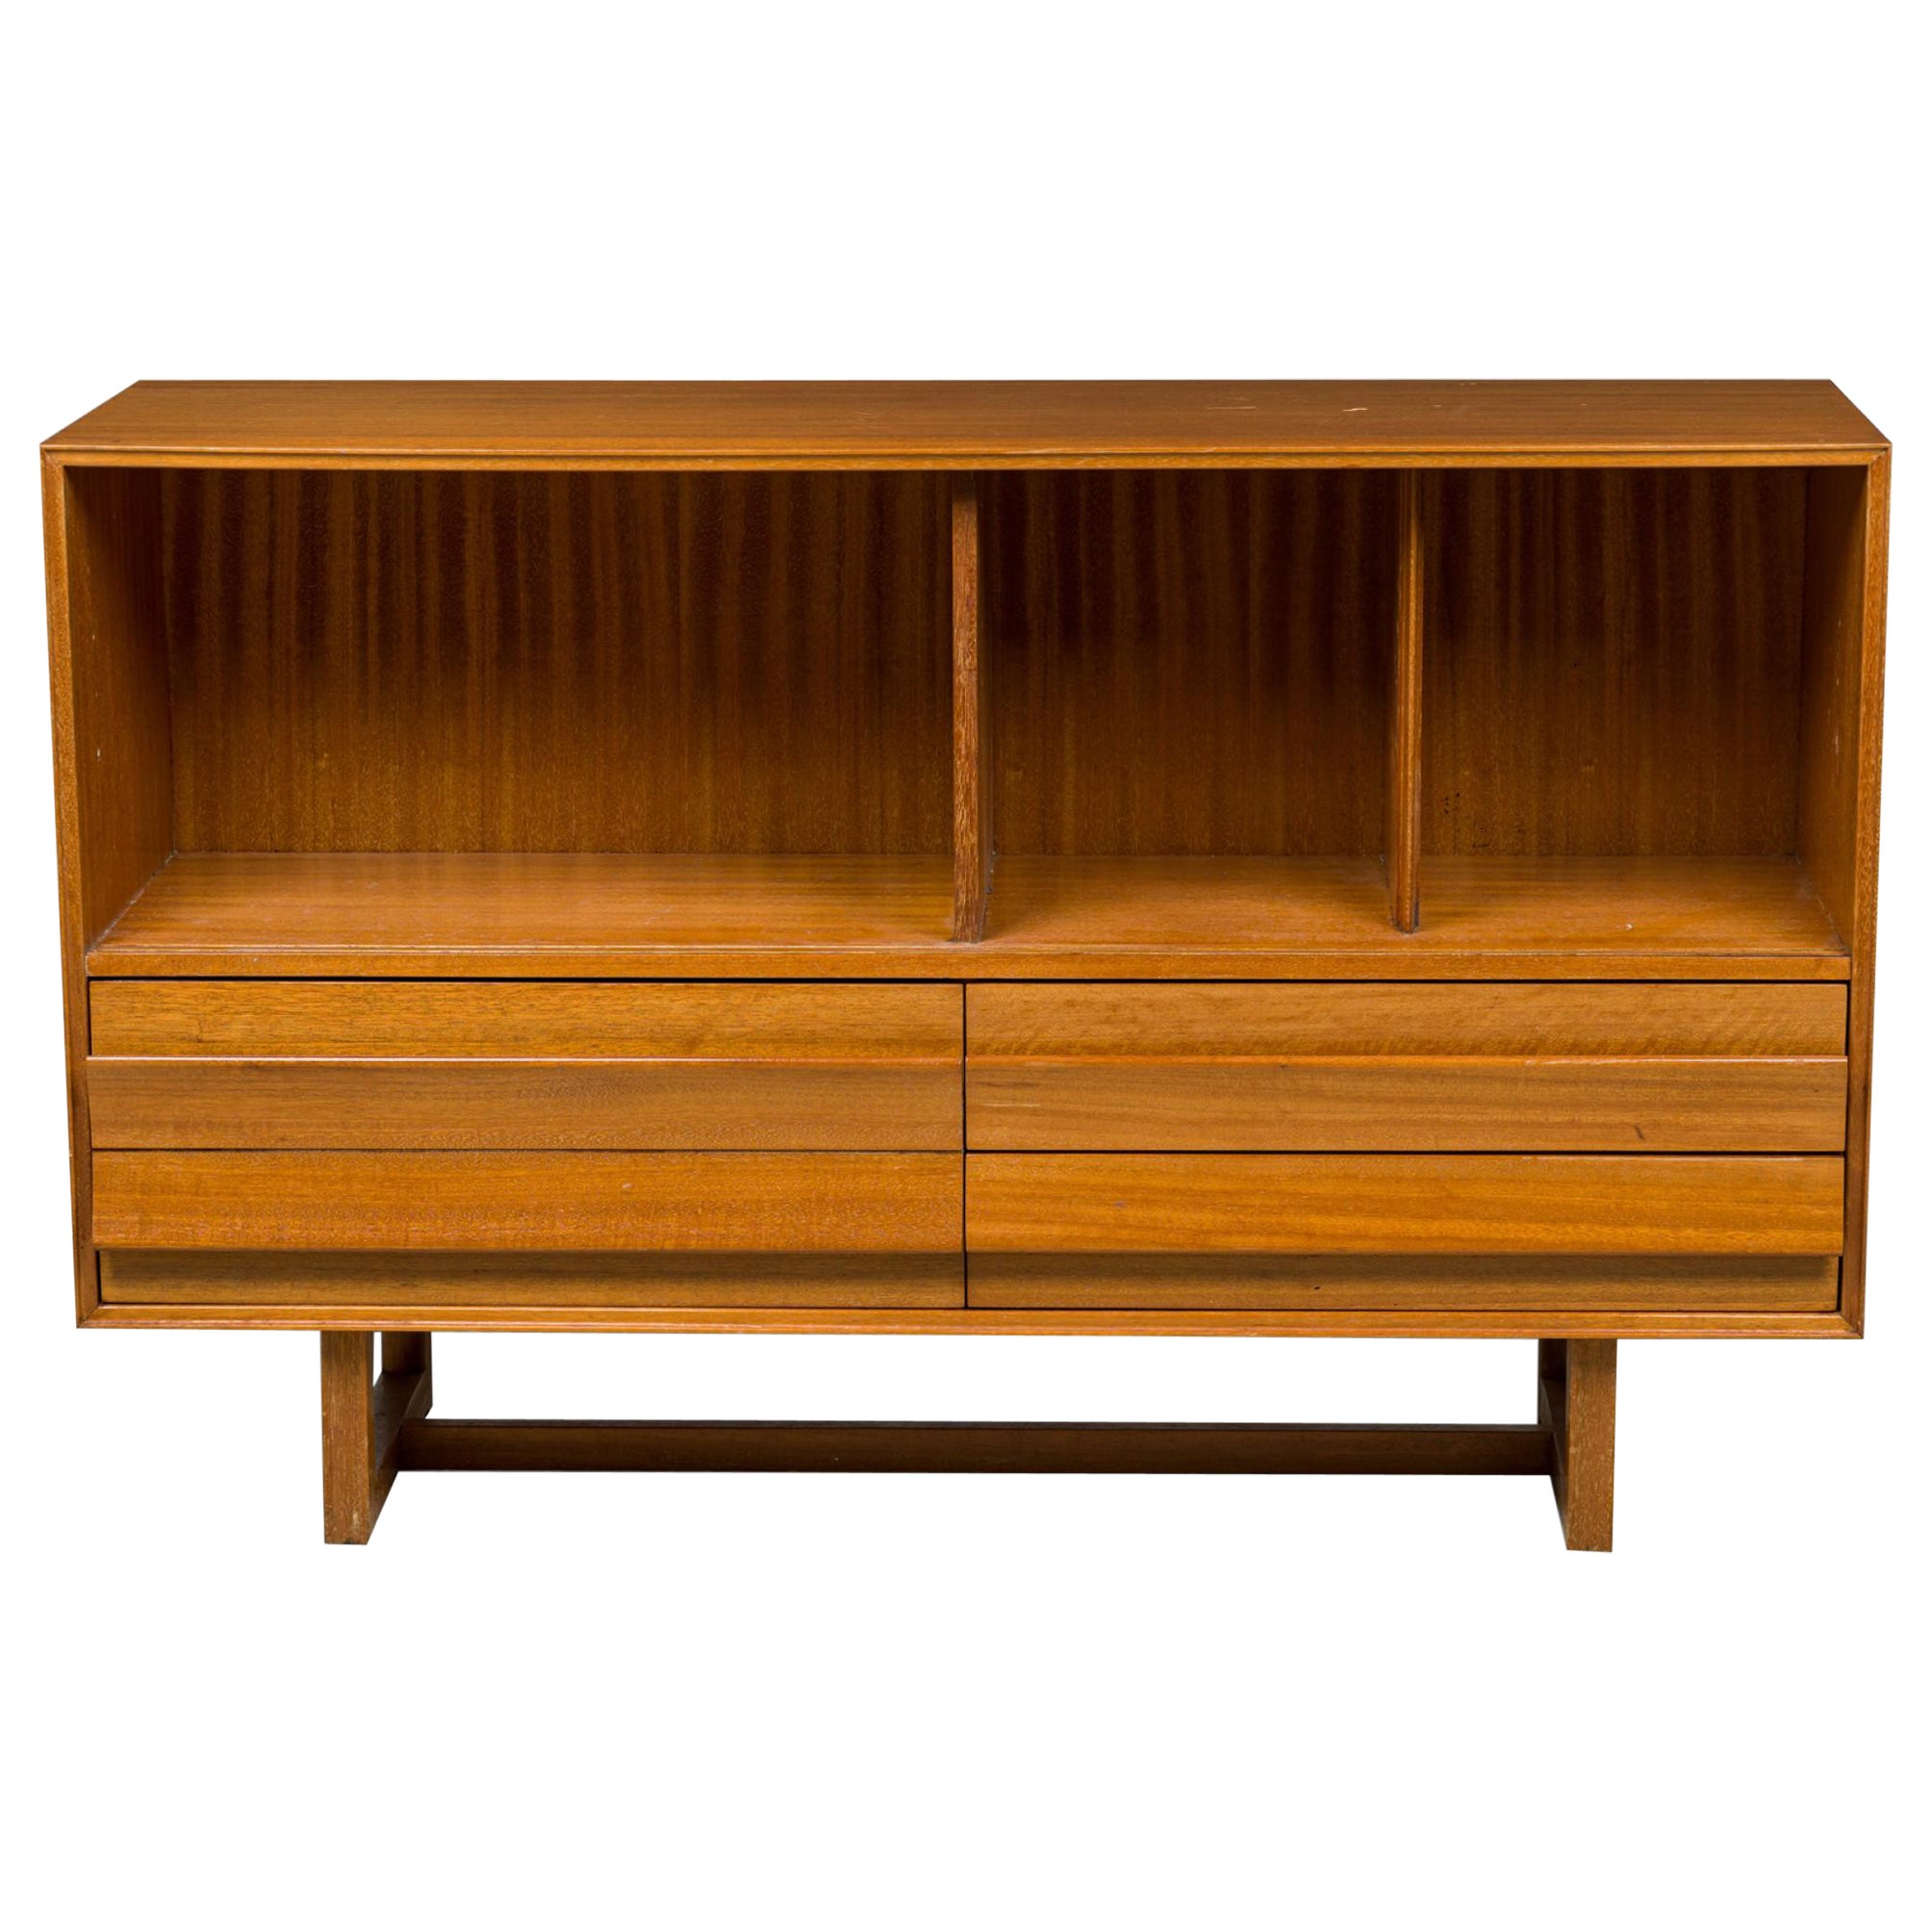 Paul Laszlo Continental Cerused Mahogany 3-Drawer Credenza / Sideboard For Sale